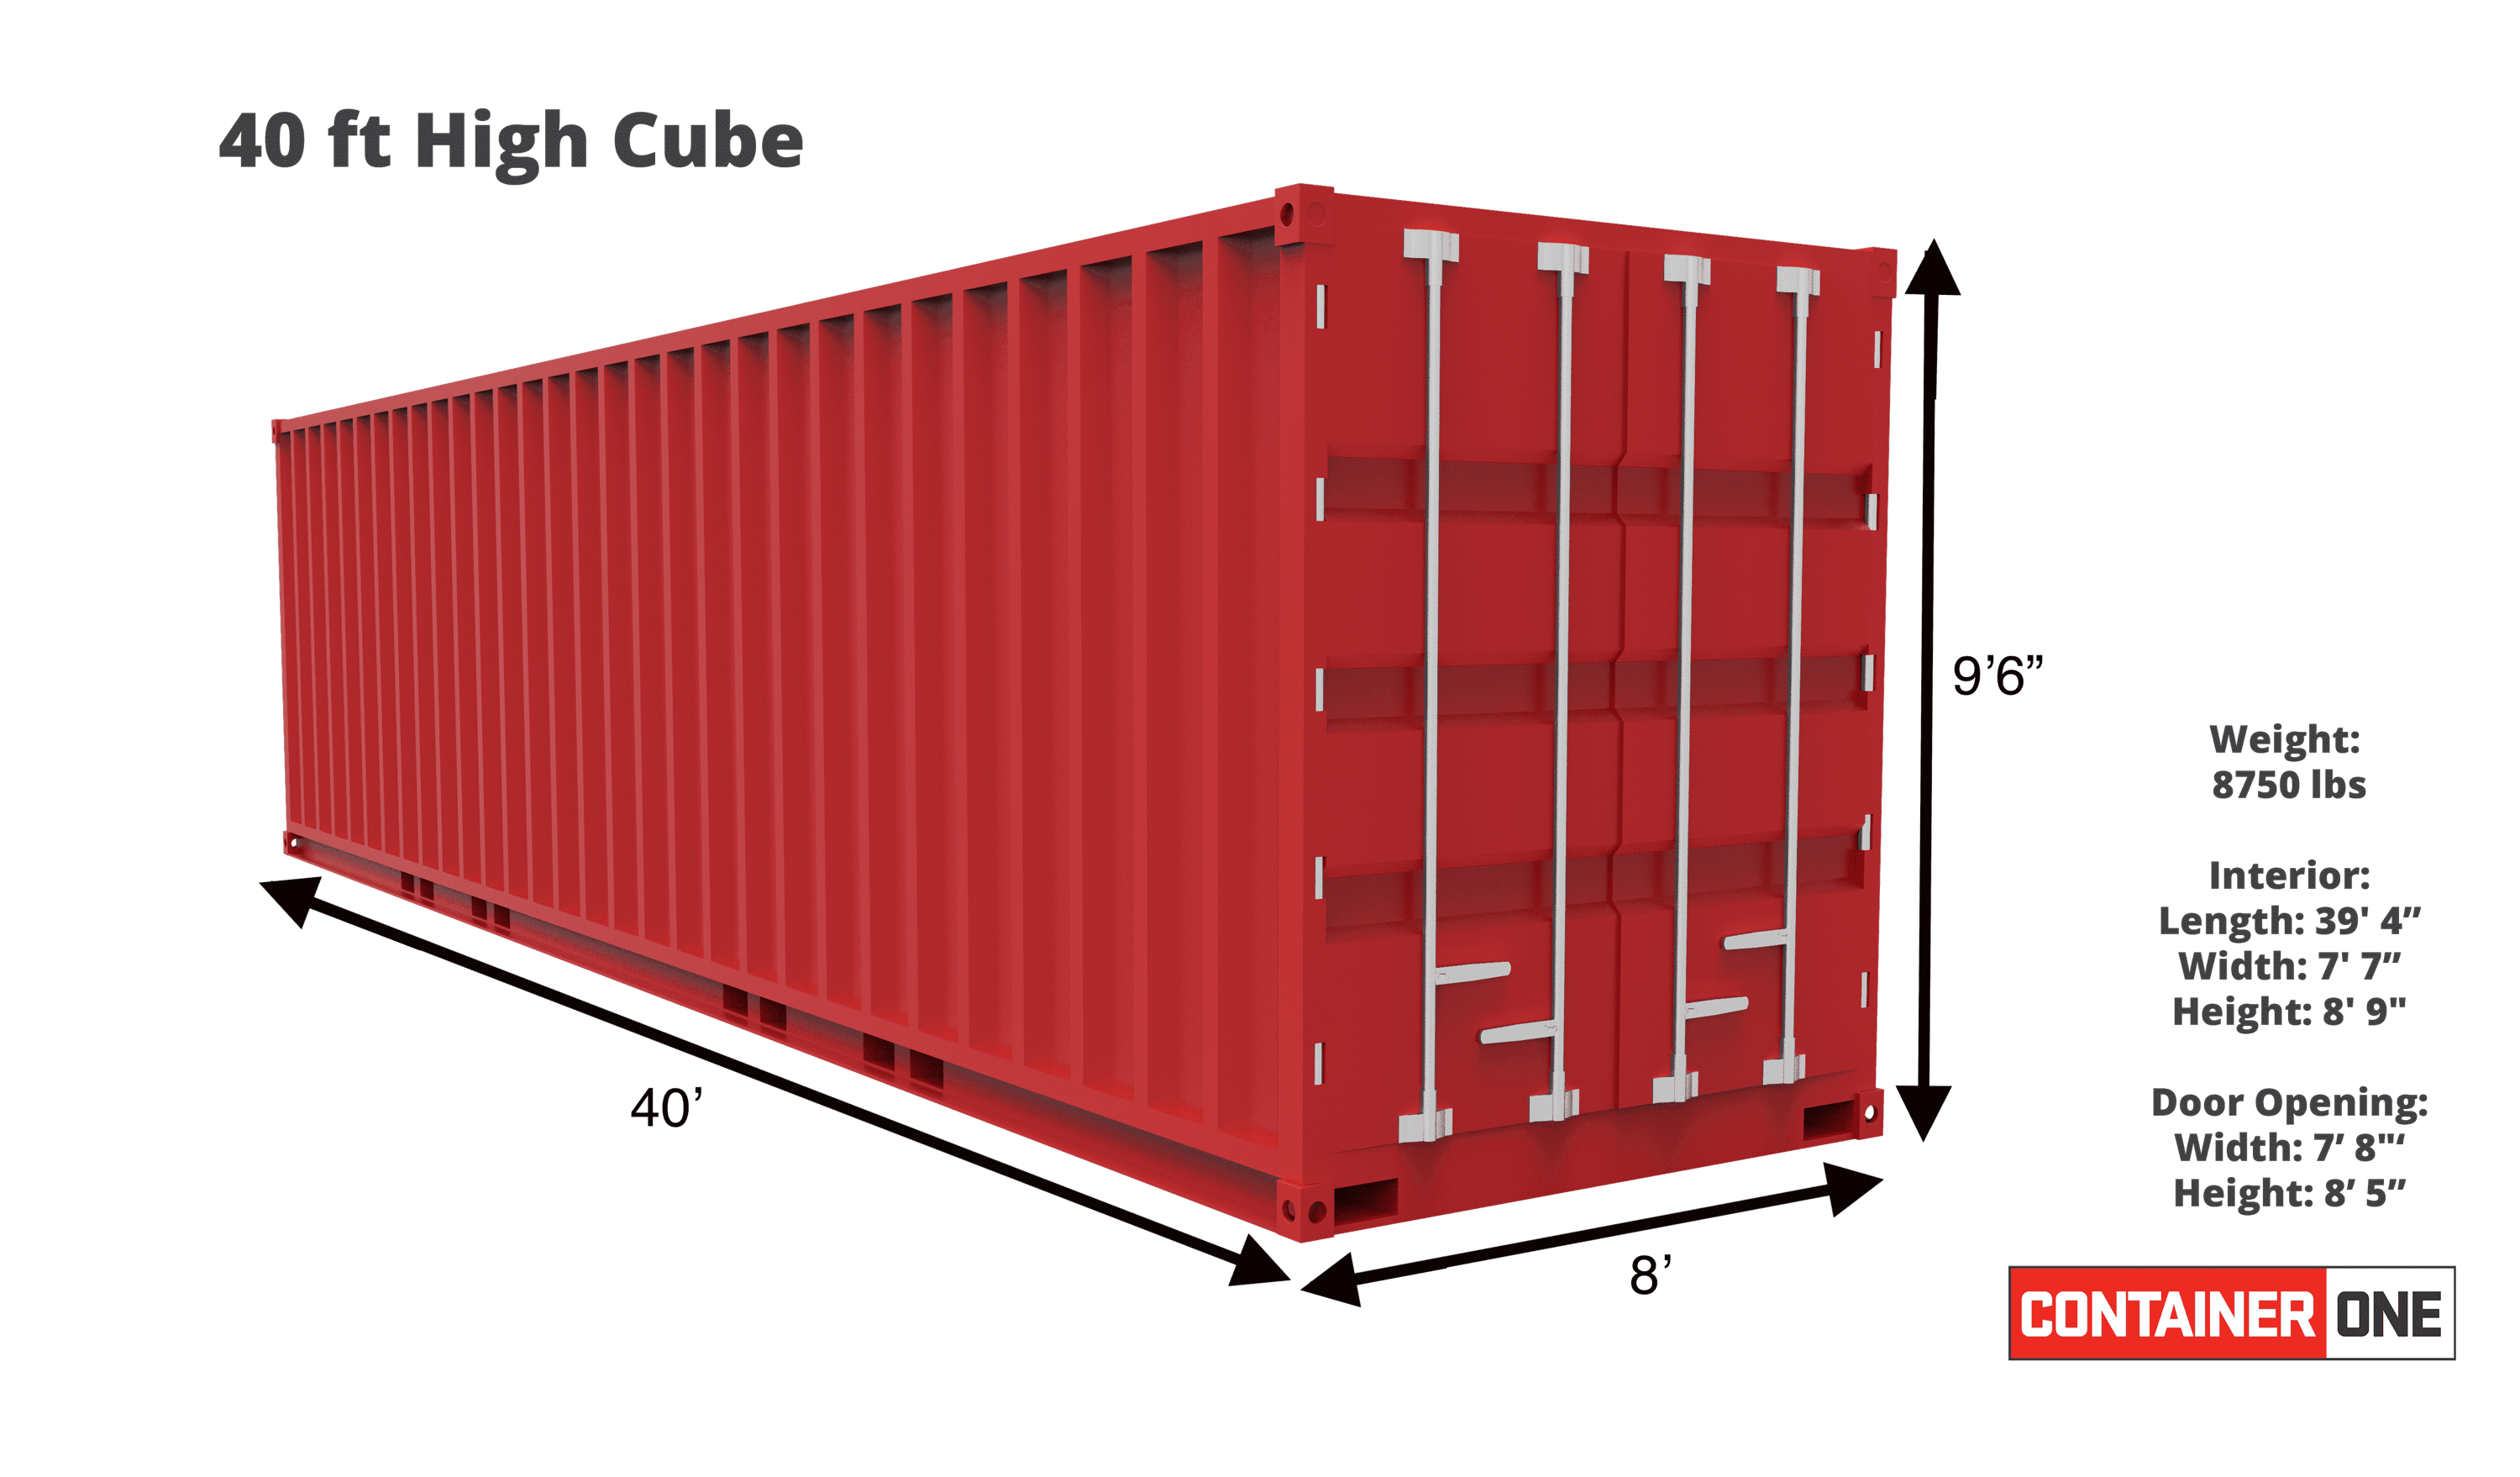 40 foot high cube shipping container specifications